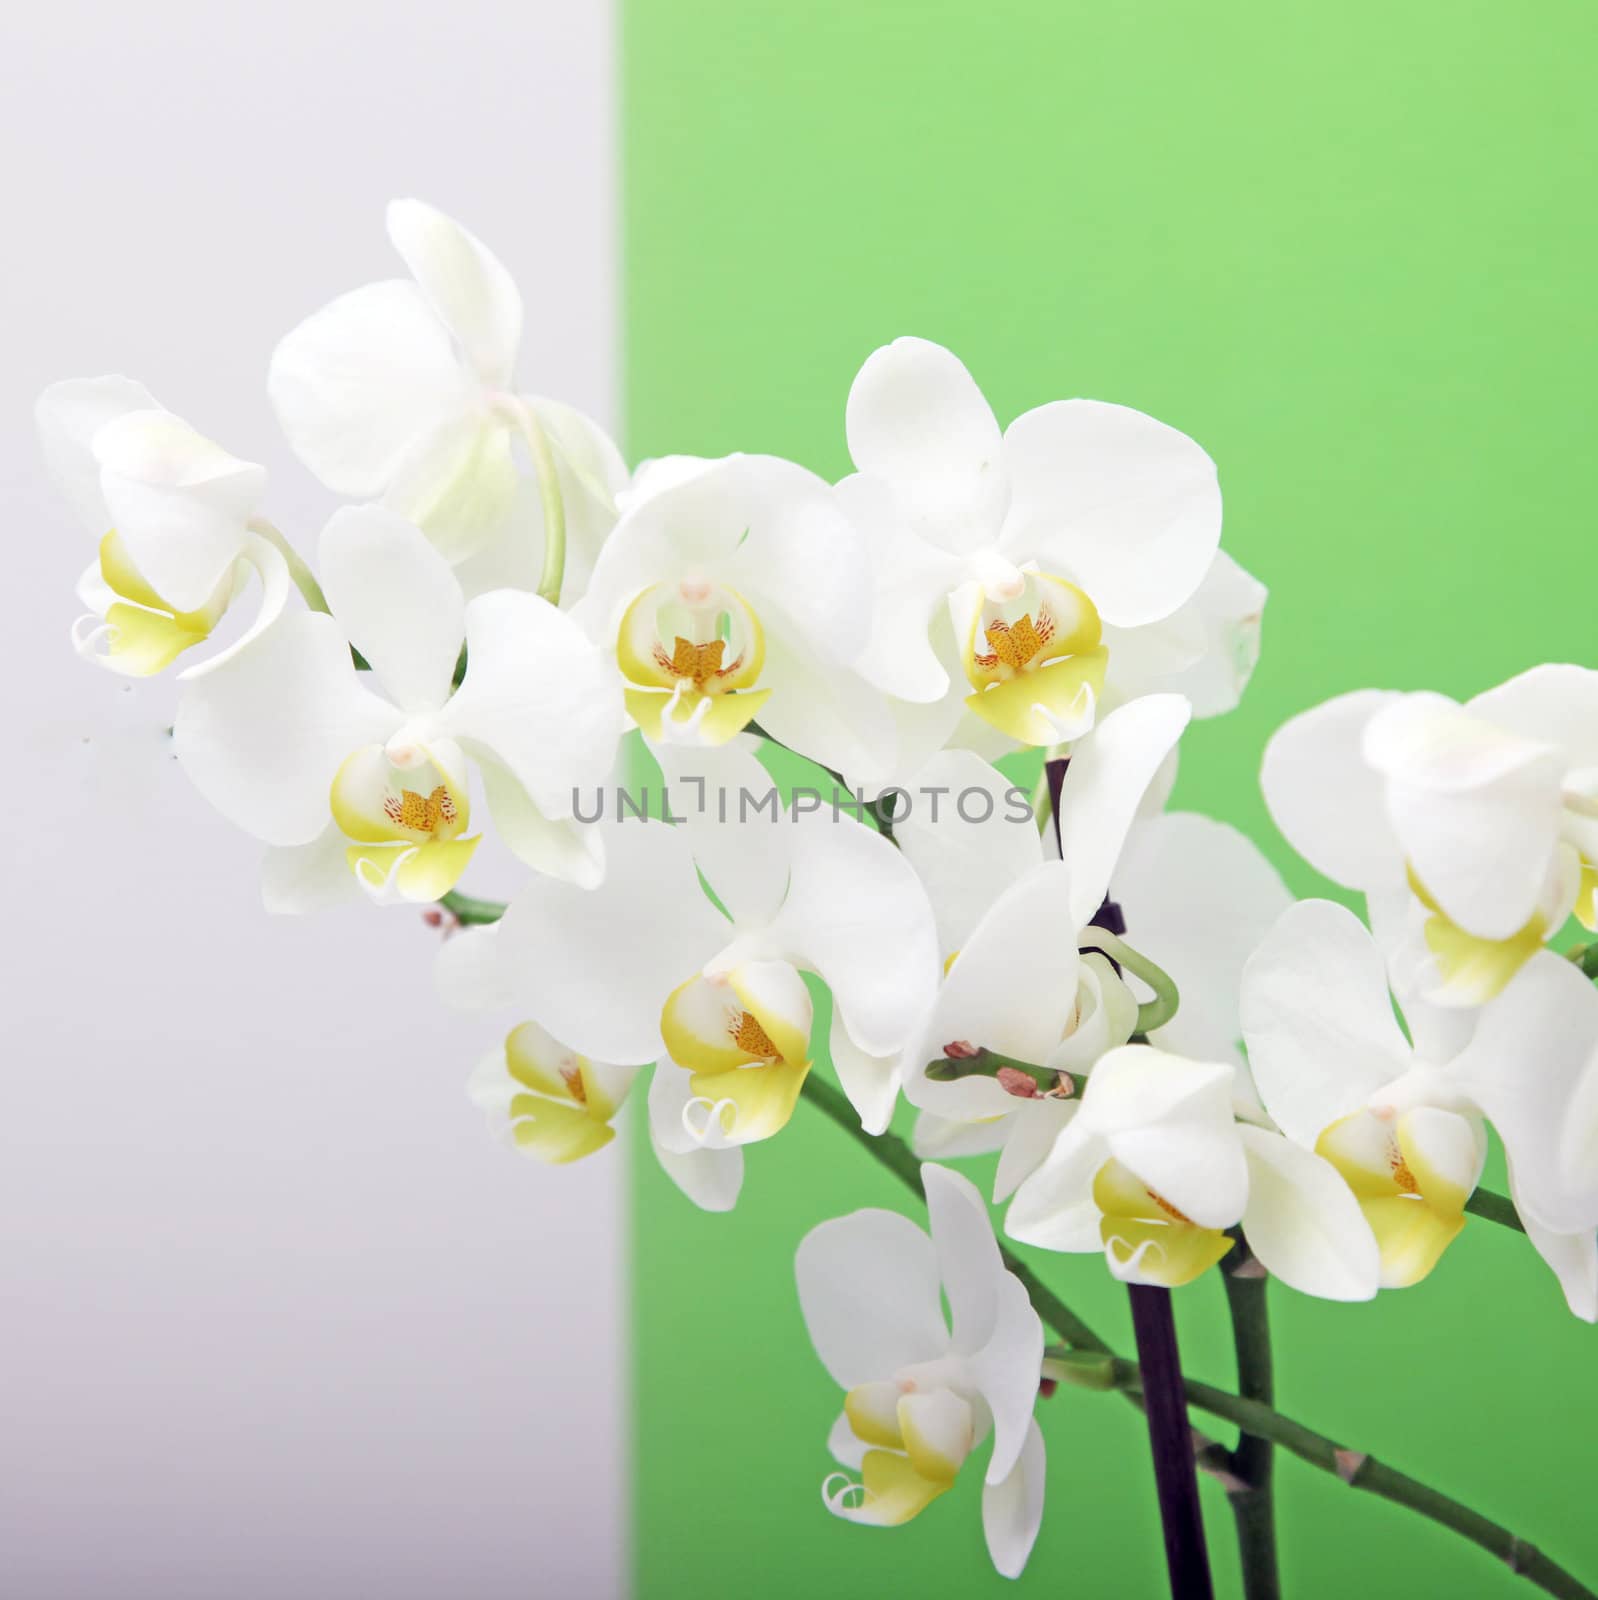 Spray of decorative white orchids against a two toned grey and green background